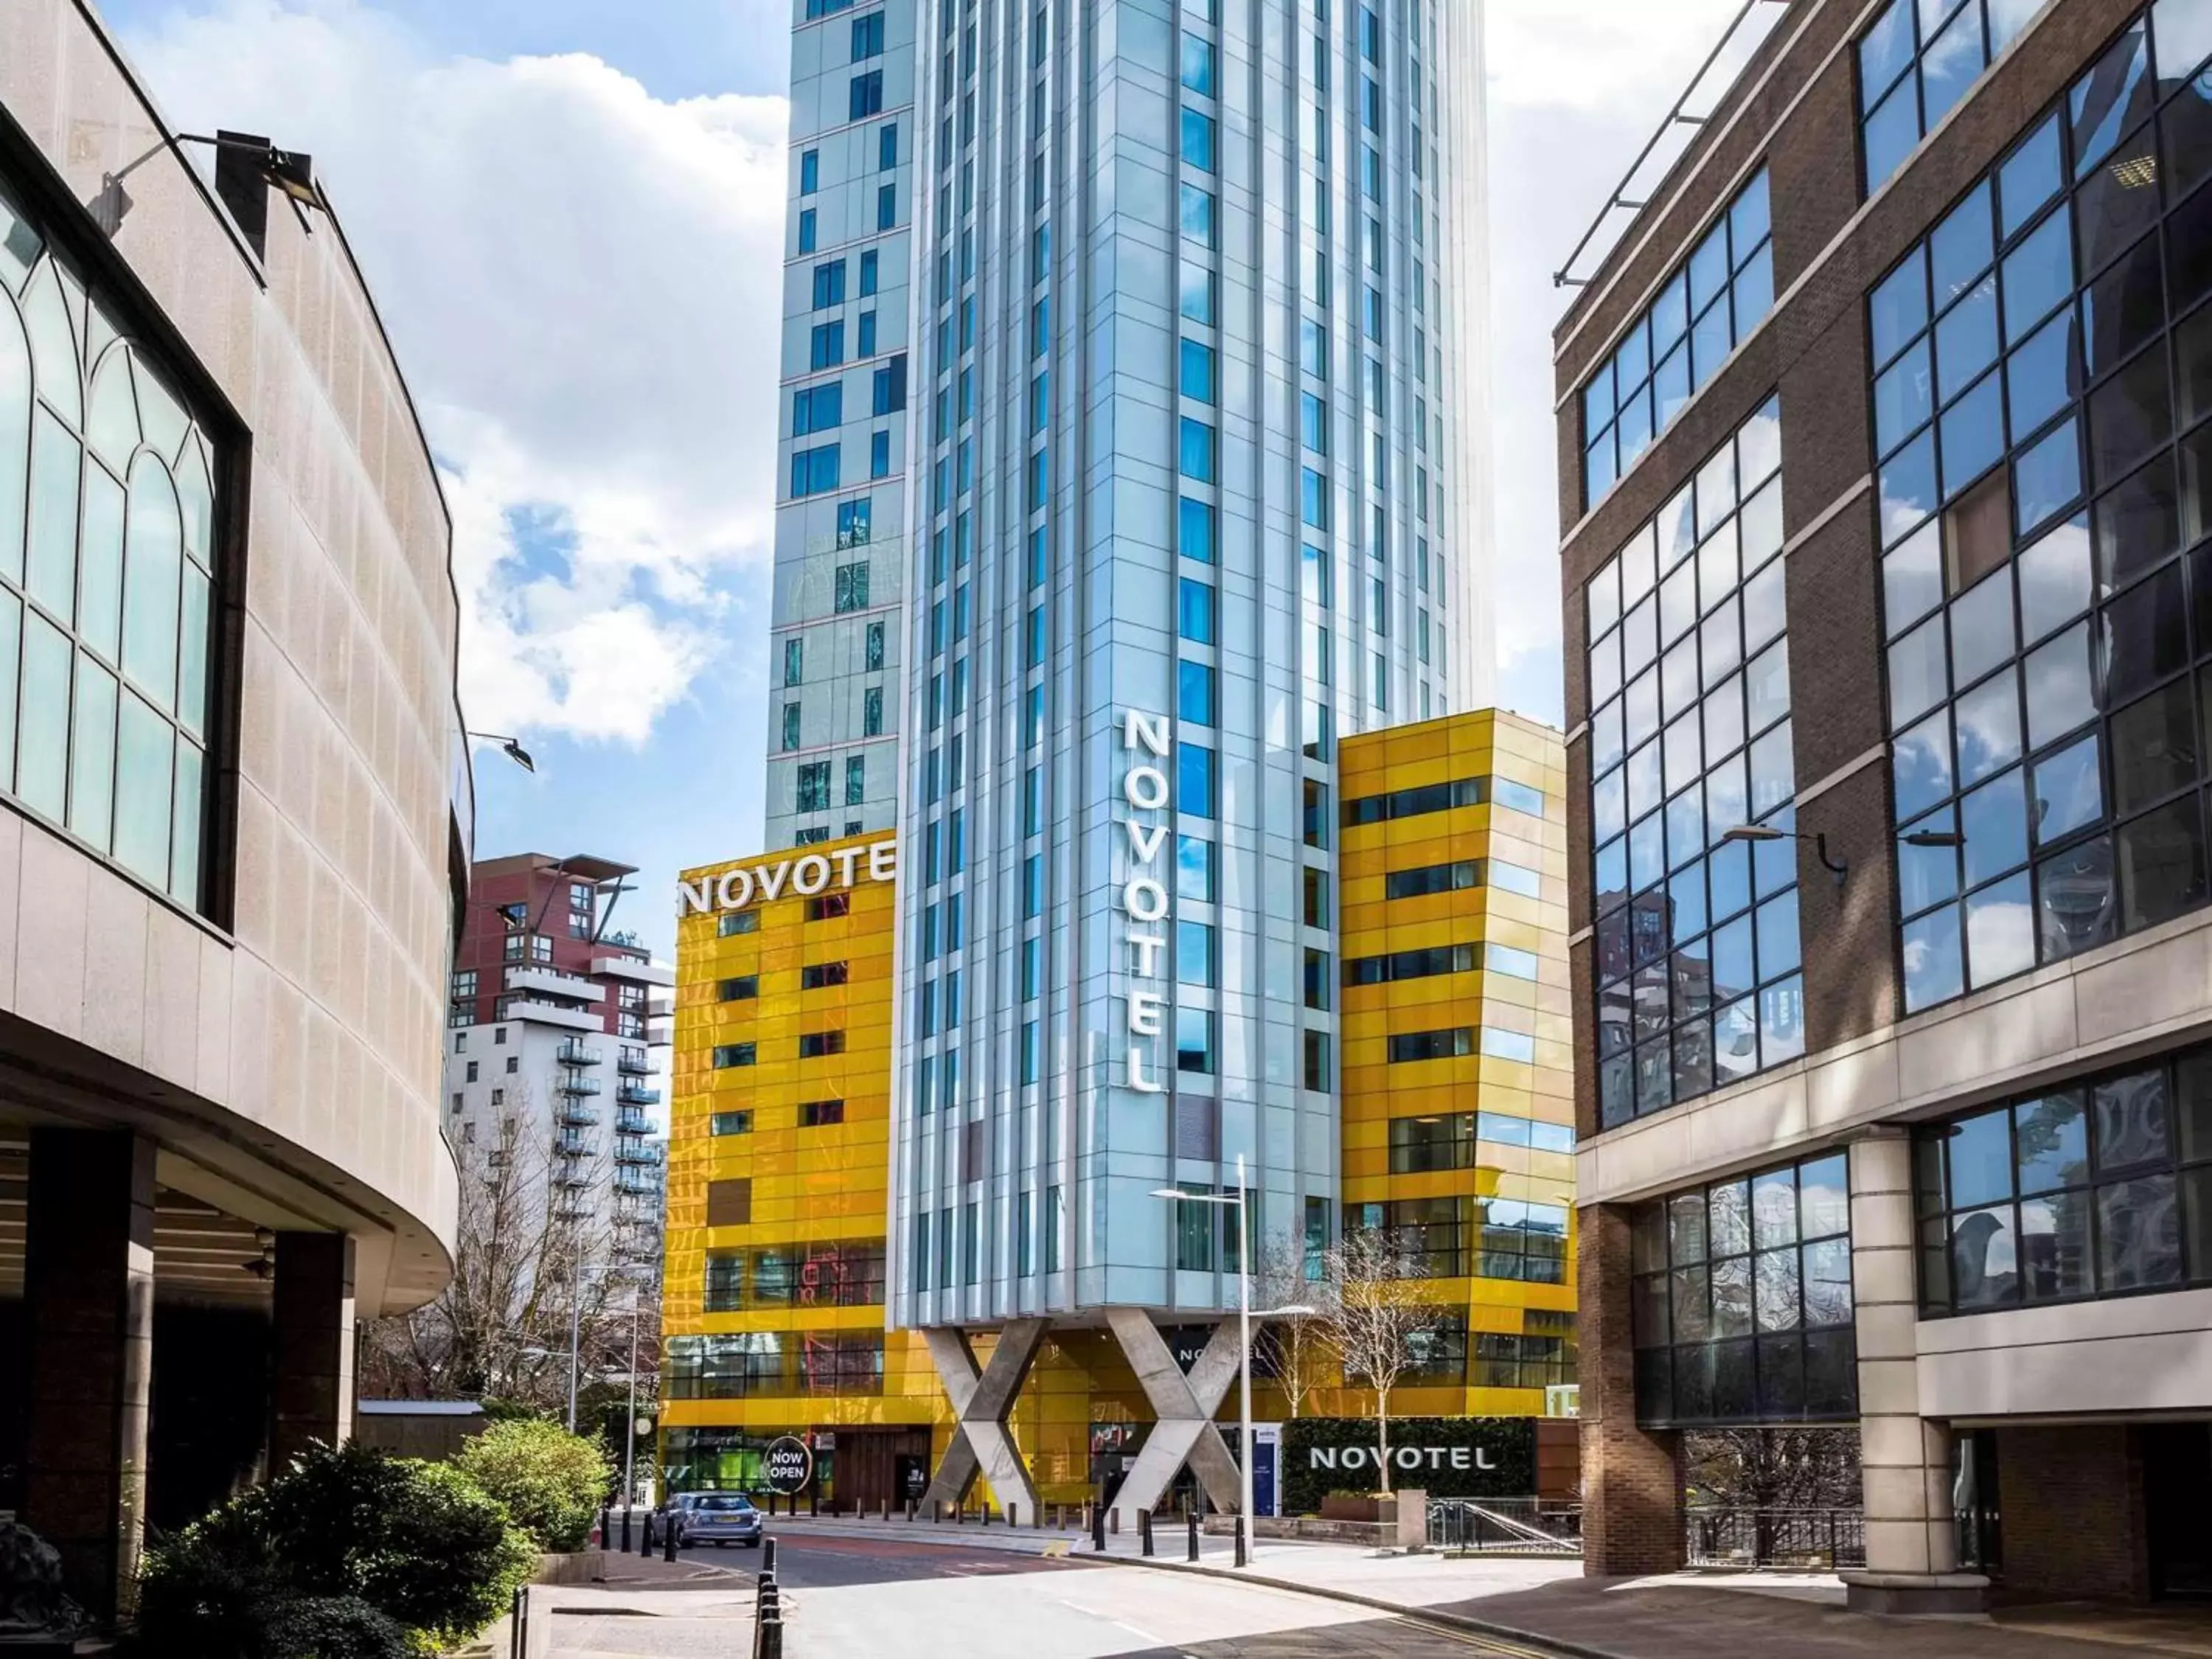 Property Building in Novotel London Canary Wharf